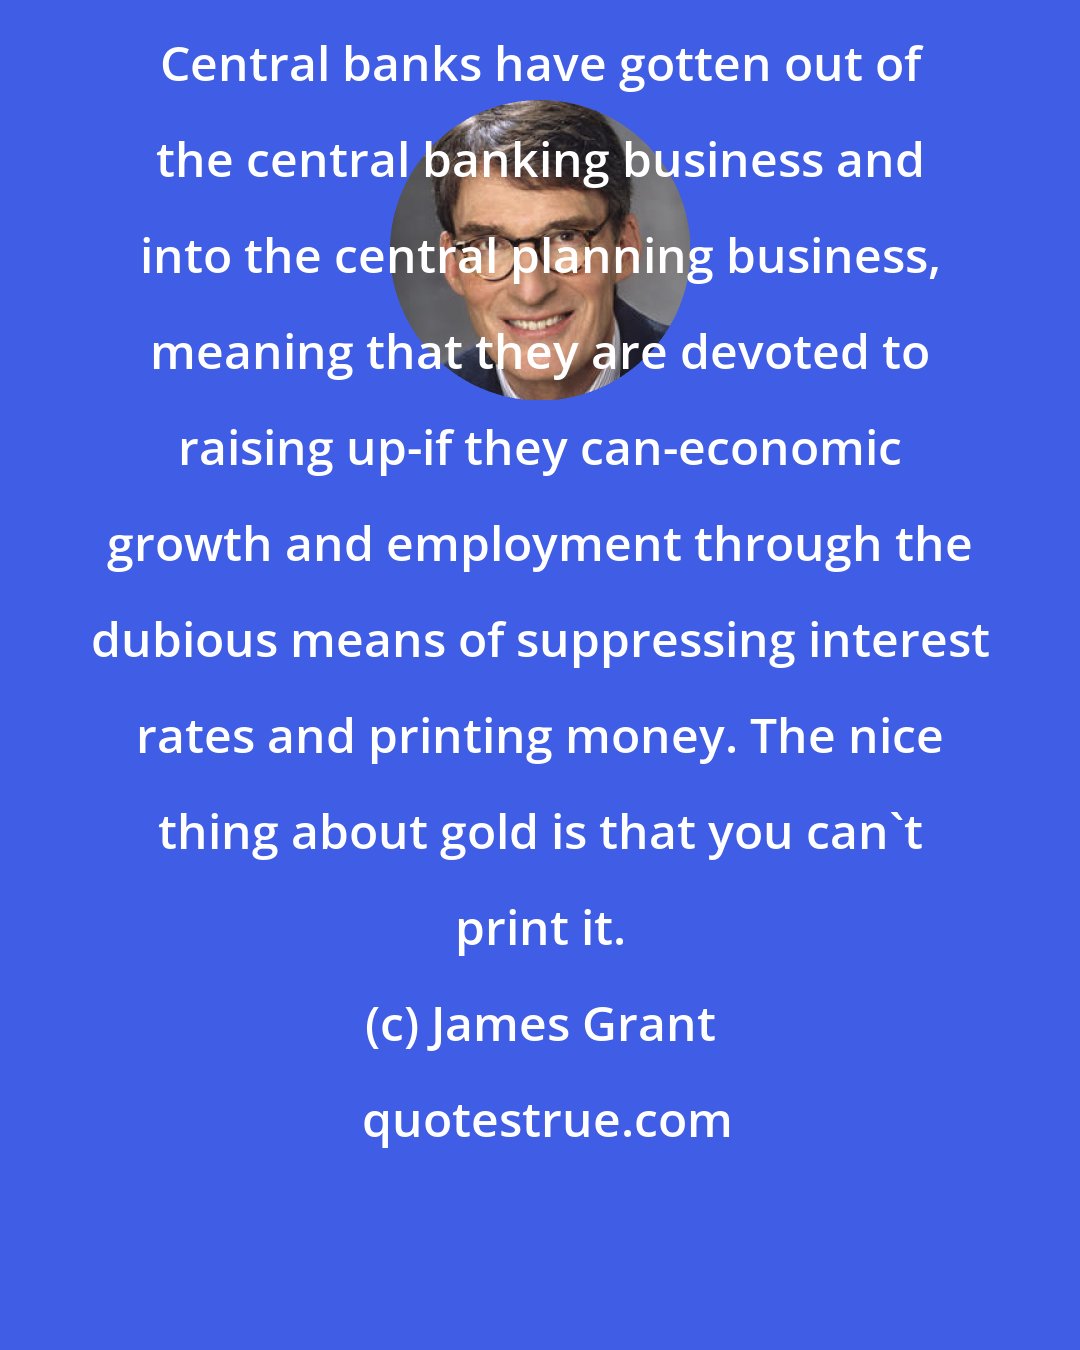 James Grant: Central banks have gotten out of the central banking business and into the central planning business, meaning that they are devoted to raising up-if they can-economic growth and employment through the dubious means of suppressing interest rates and printing money. The nice thing about gold is that you can't print it.